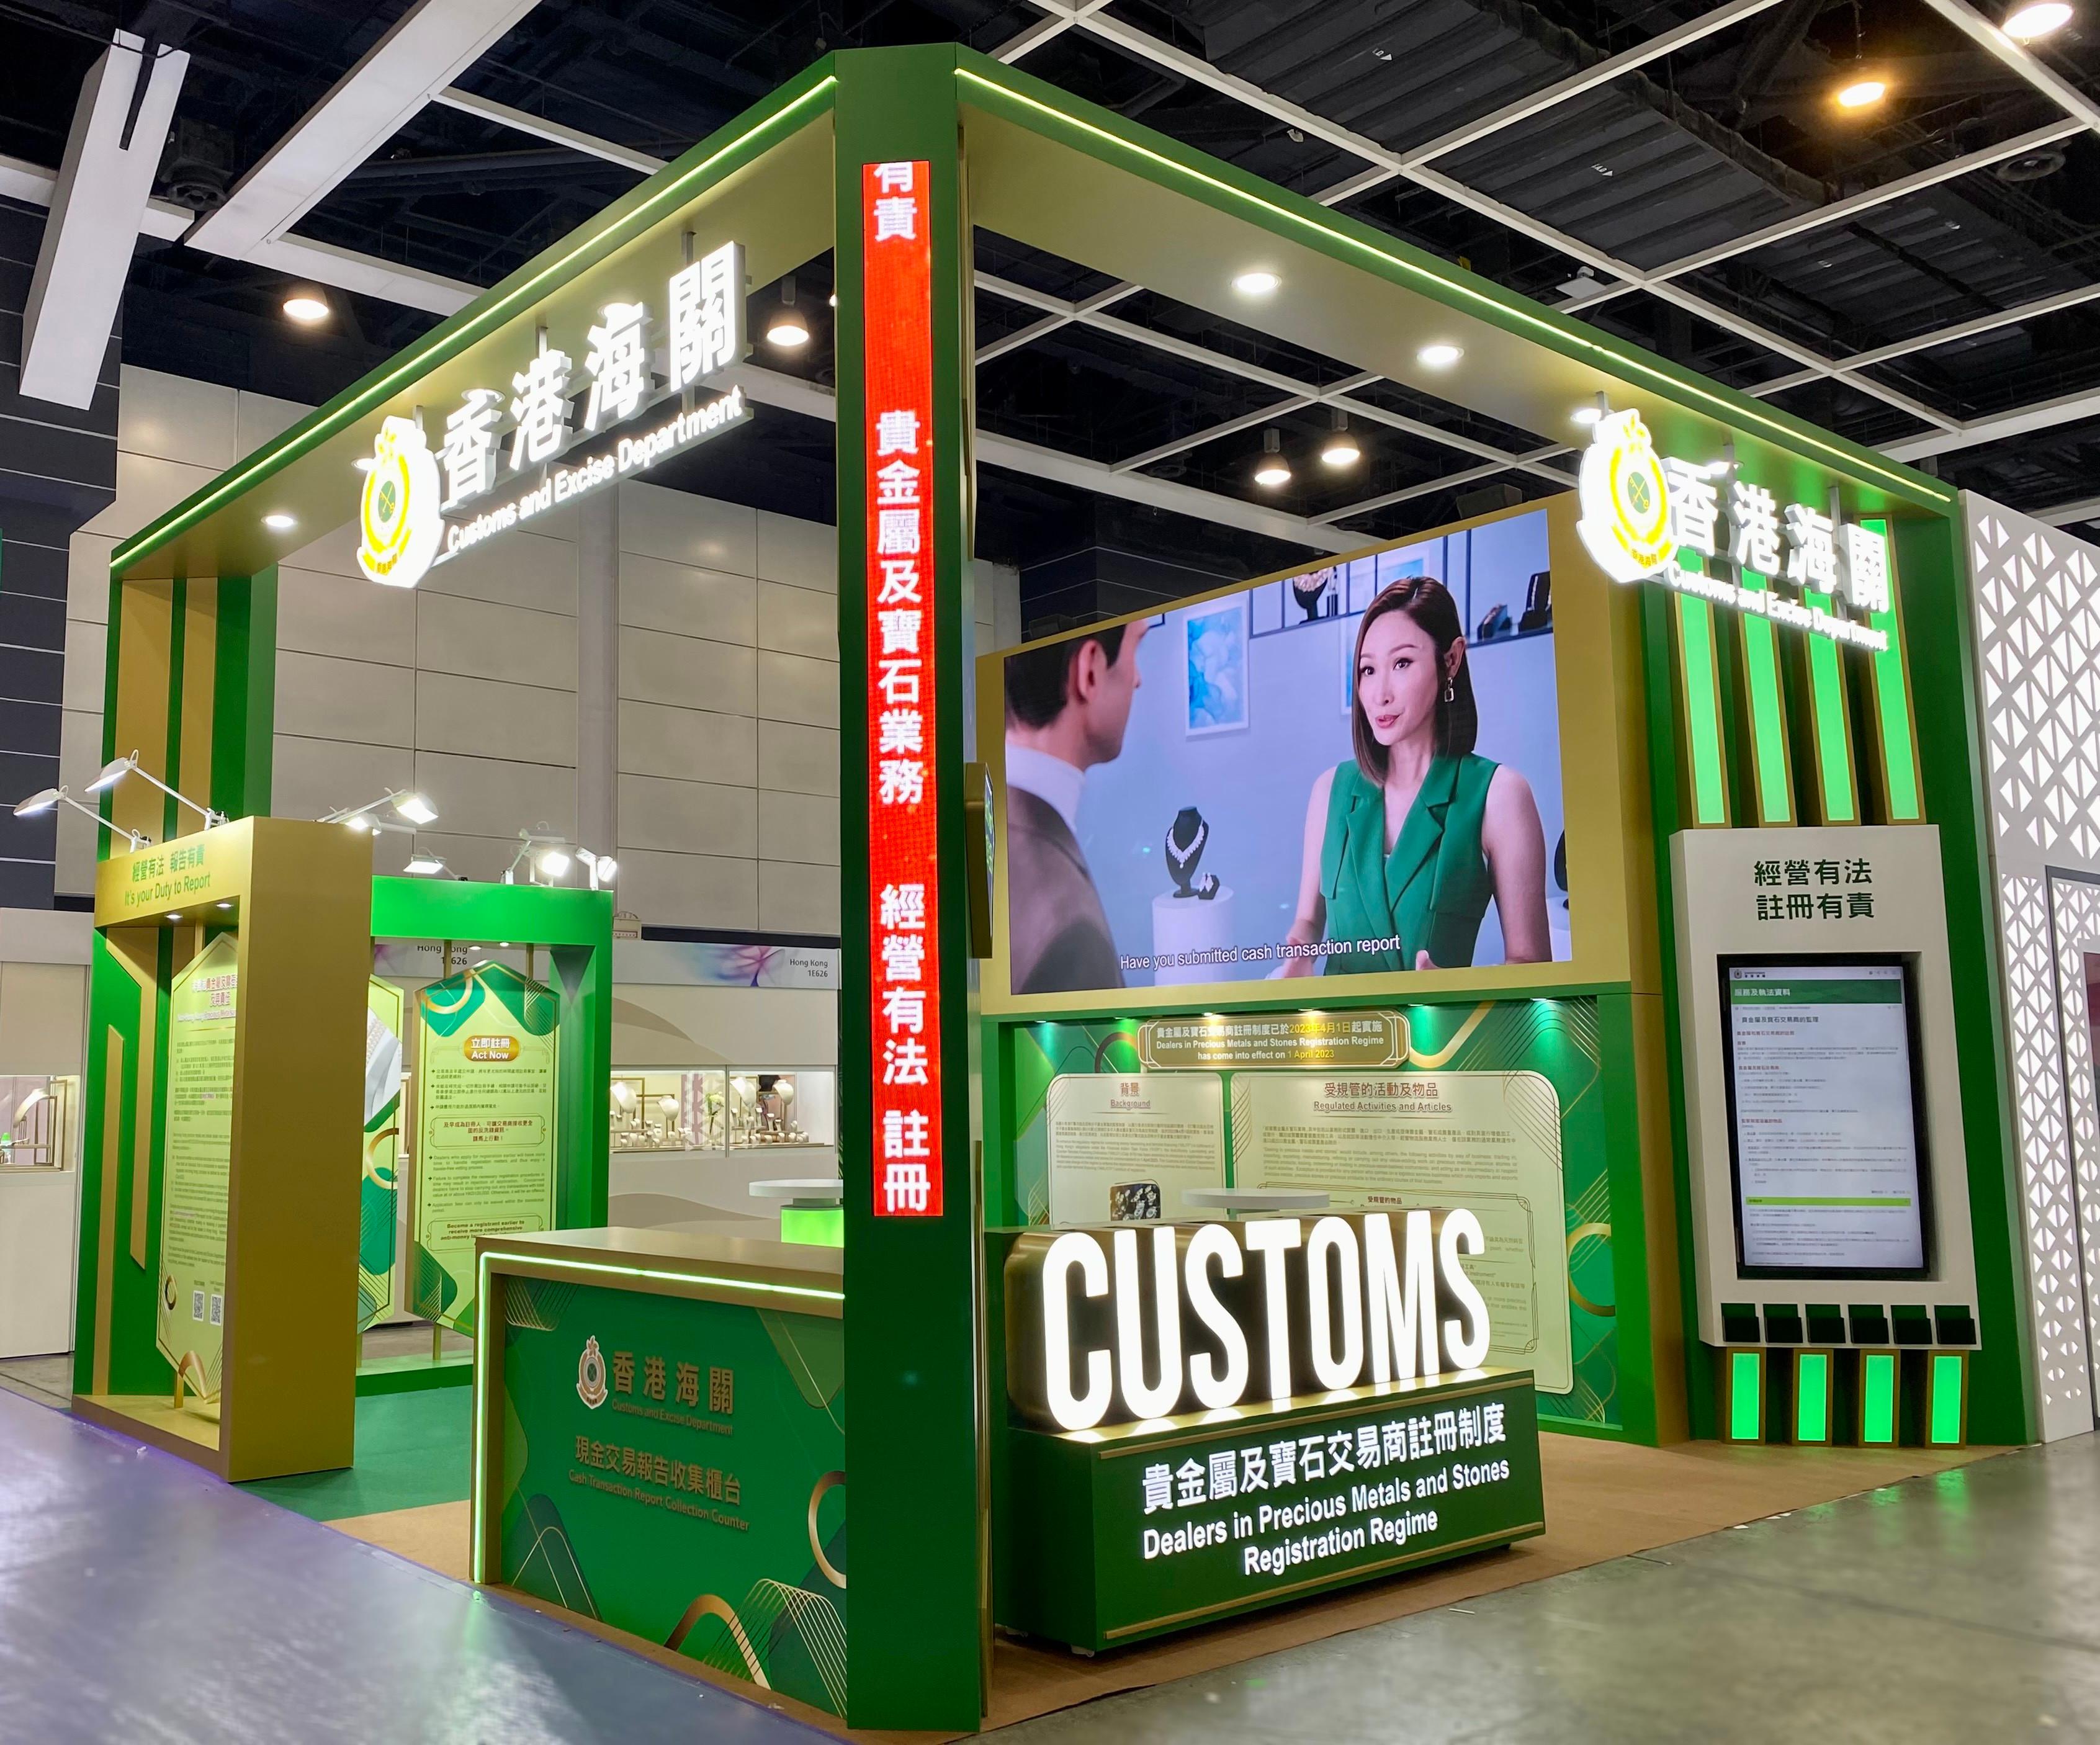 Hong Kong Customs will set up a booth at the Jewellery & Gem WORLD Hong Kong, to be held at the Hong Kong Convention and Exhibition Centre, from tomorrow (September 20) for five consecutive days to publicise the Dealers in Precious Metals and Stones Regulatory Regime, and will provide on-site counter services to assist non-Hong Kong dealers in submitting a cash transaction report during their participation in the exhibition. Photo shows the Hong Kong Customs' booth.